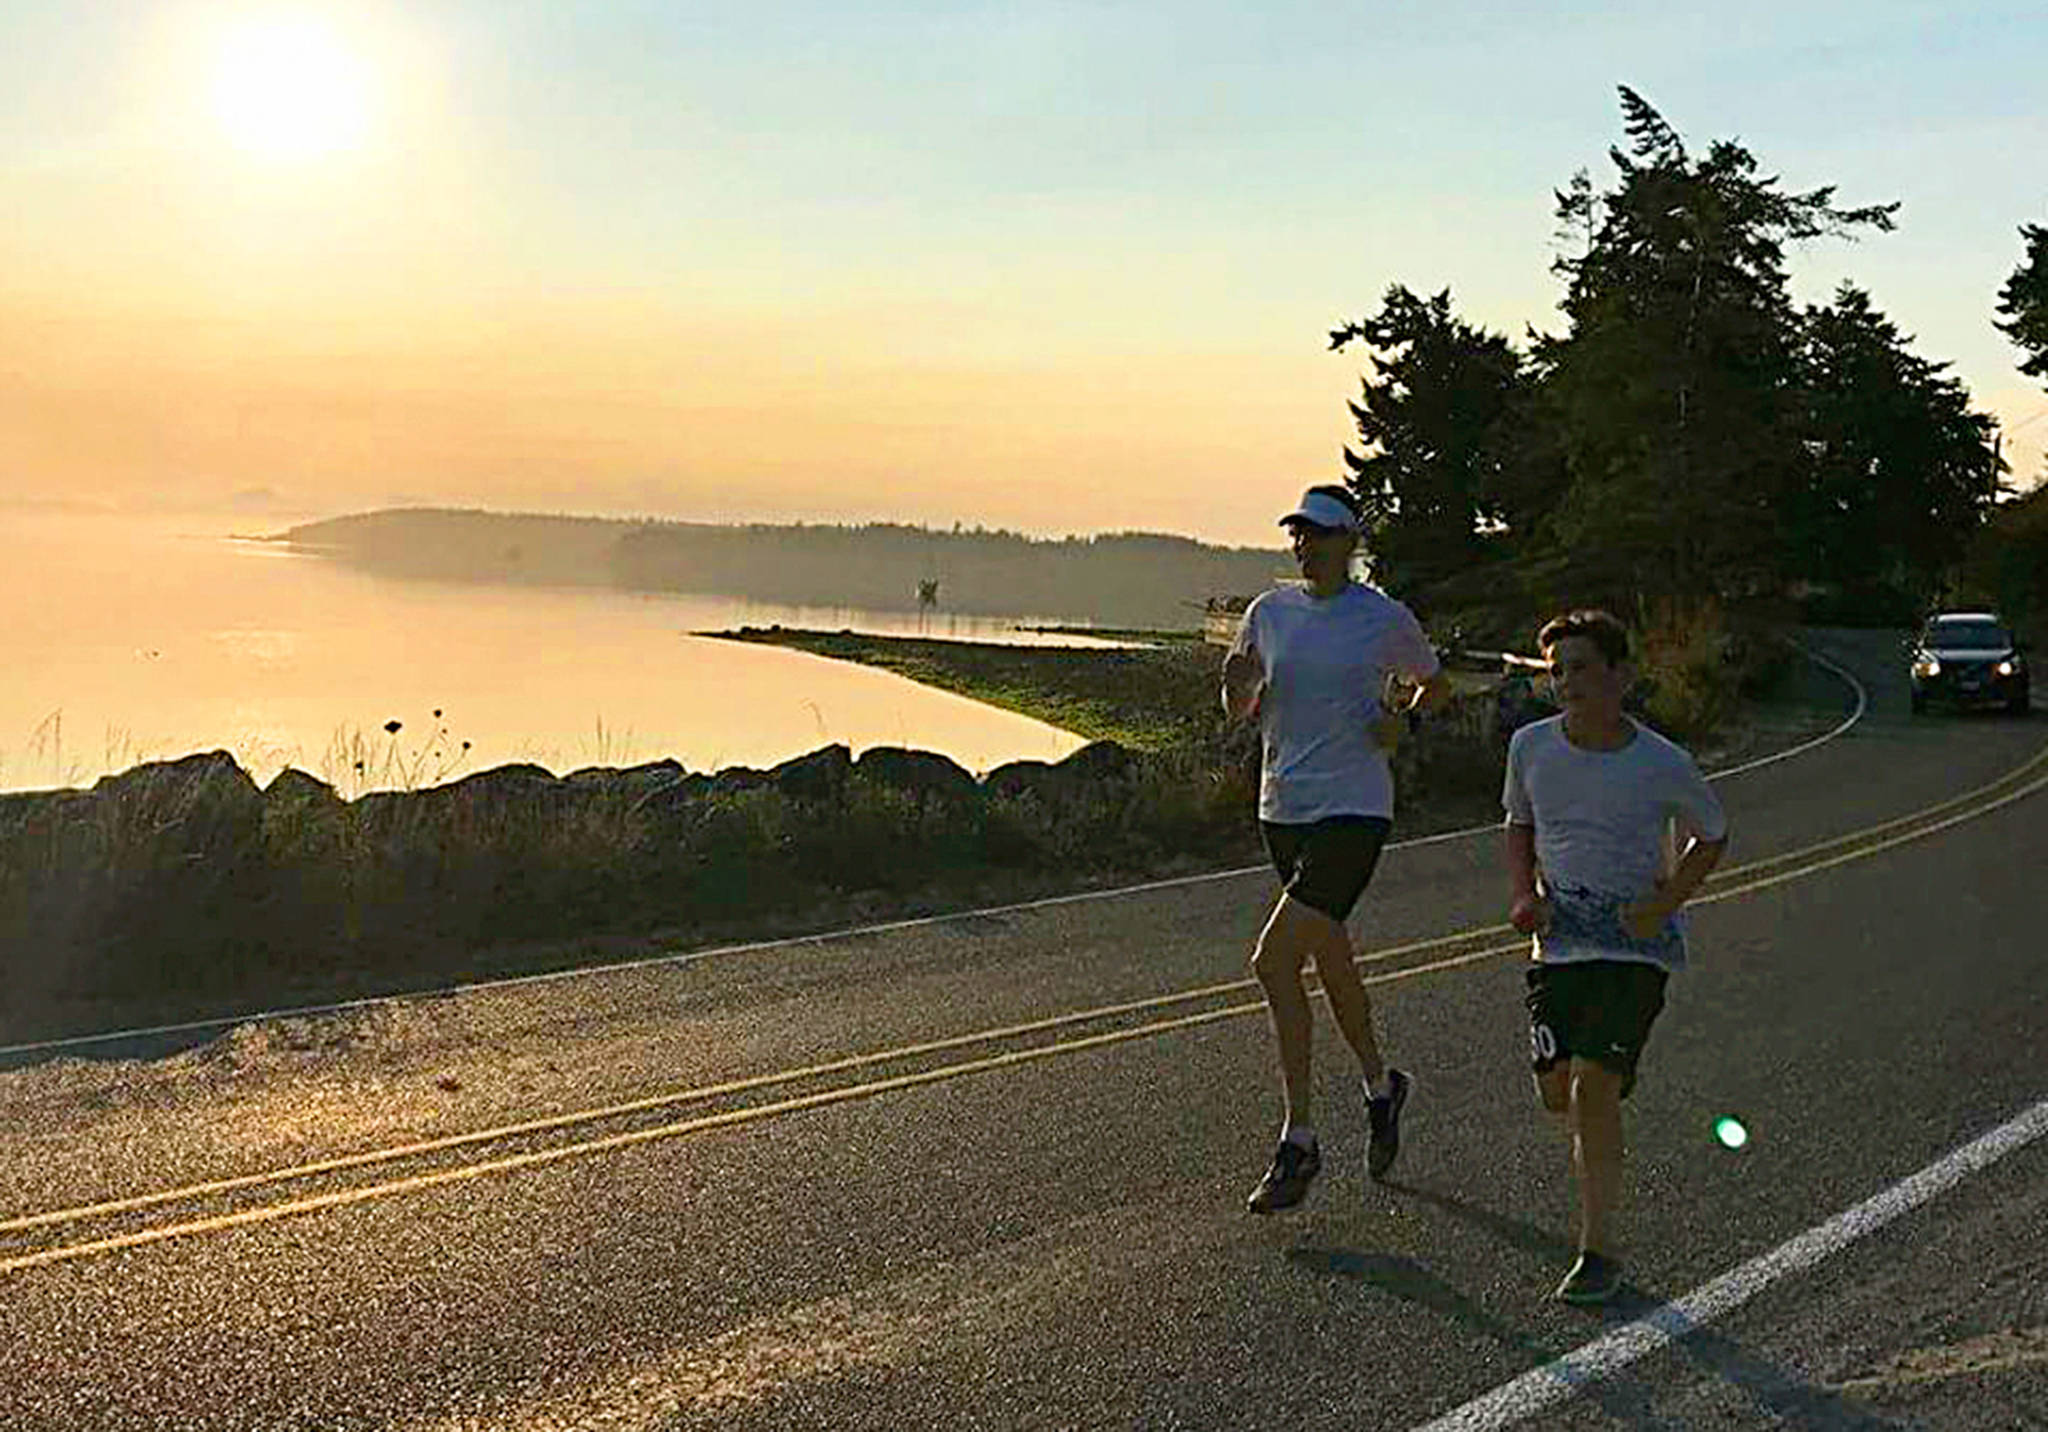 Andy Wyman and Grant Steller run along Madrona Way on the first leg Sunday. Steller was running in place of his father, James Steller, who was ill and couldn’t complete the event he planned. (Submitted photo)